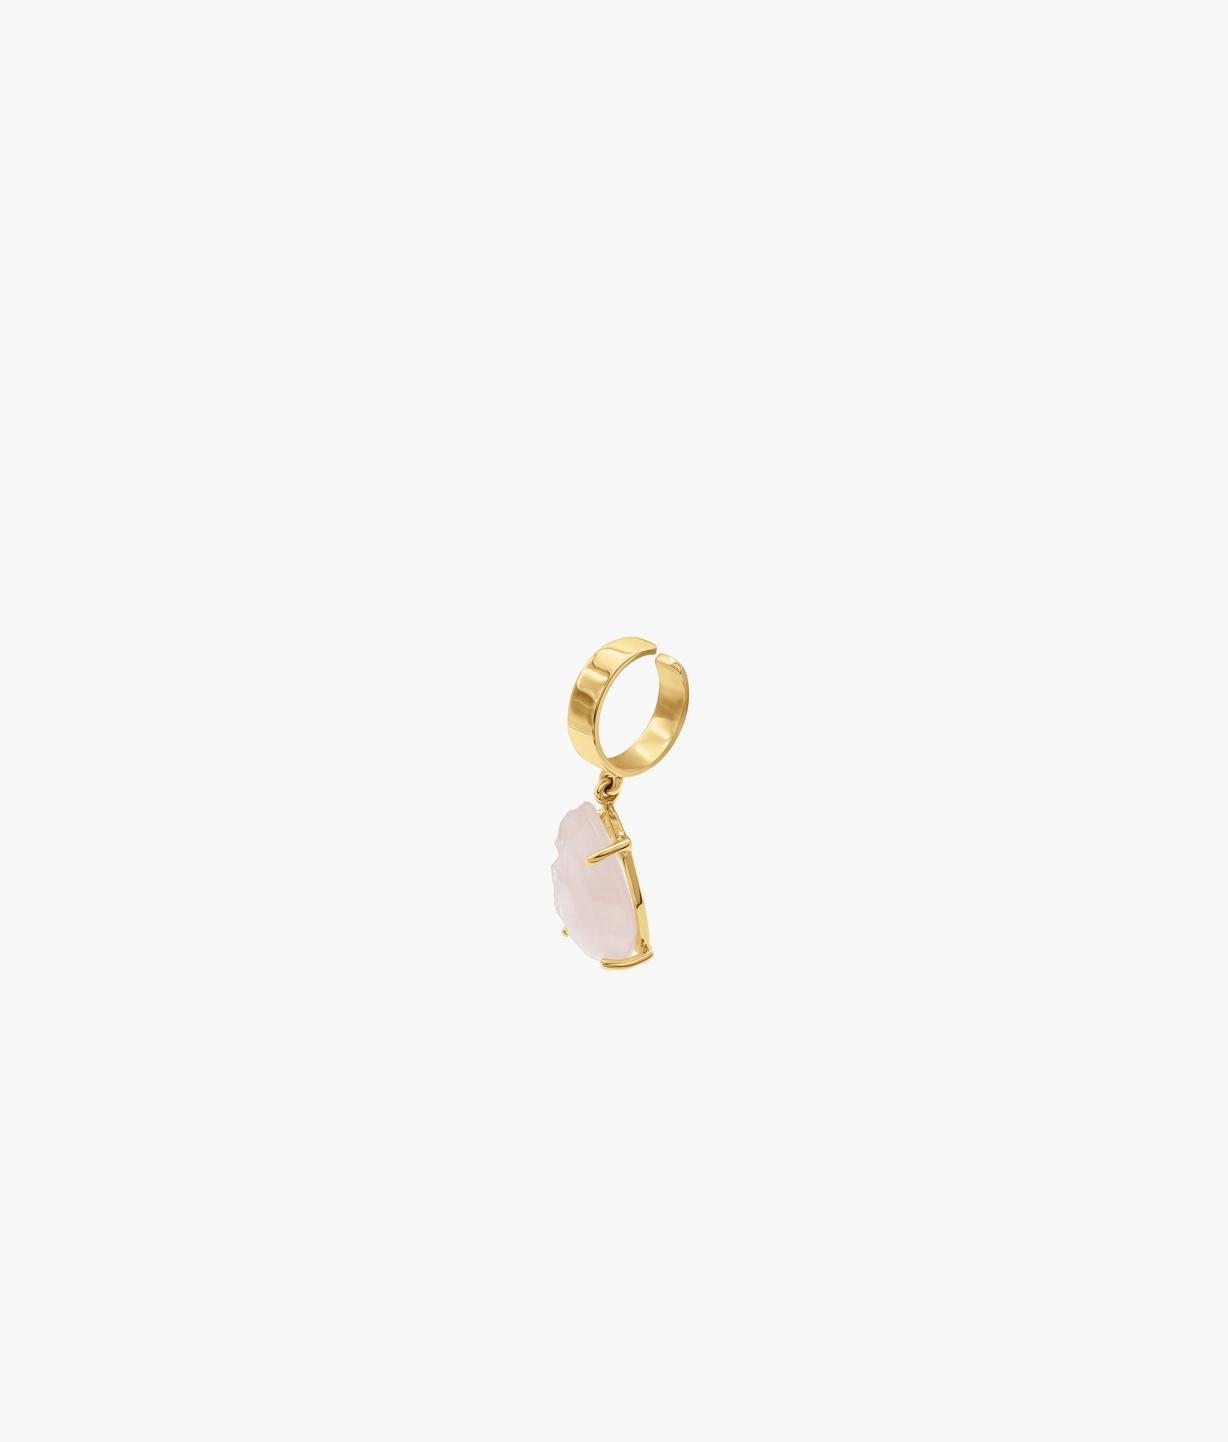 One-of-a-kind rose quartz ear cuff .
Hand-made assembled on a 14-karat gold frame and recovered from our broken gems archives.
Gemstones: Rose Quartz / Dimensions: inner diameter Ø11mm / SUOT G585 engraving.